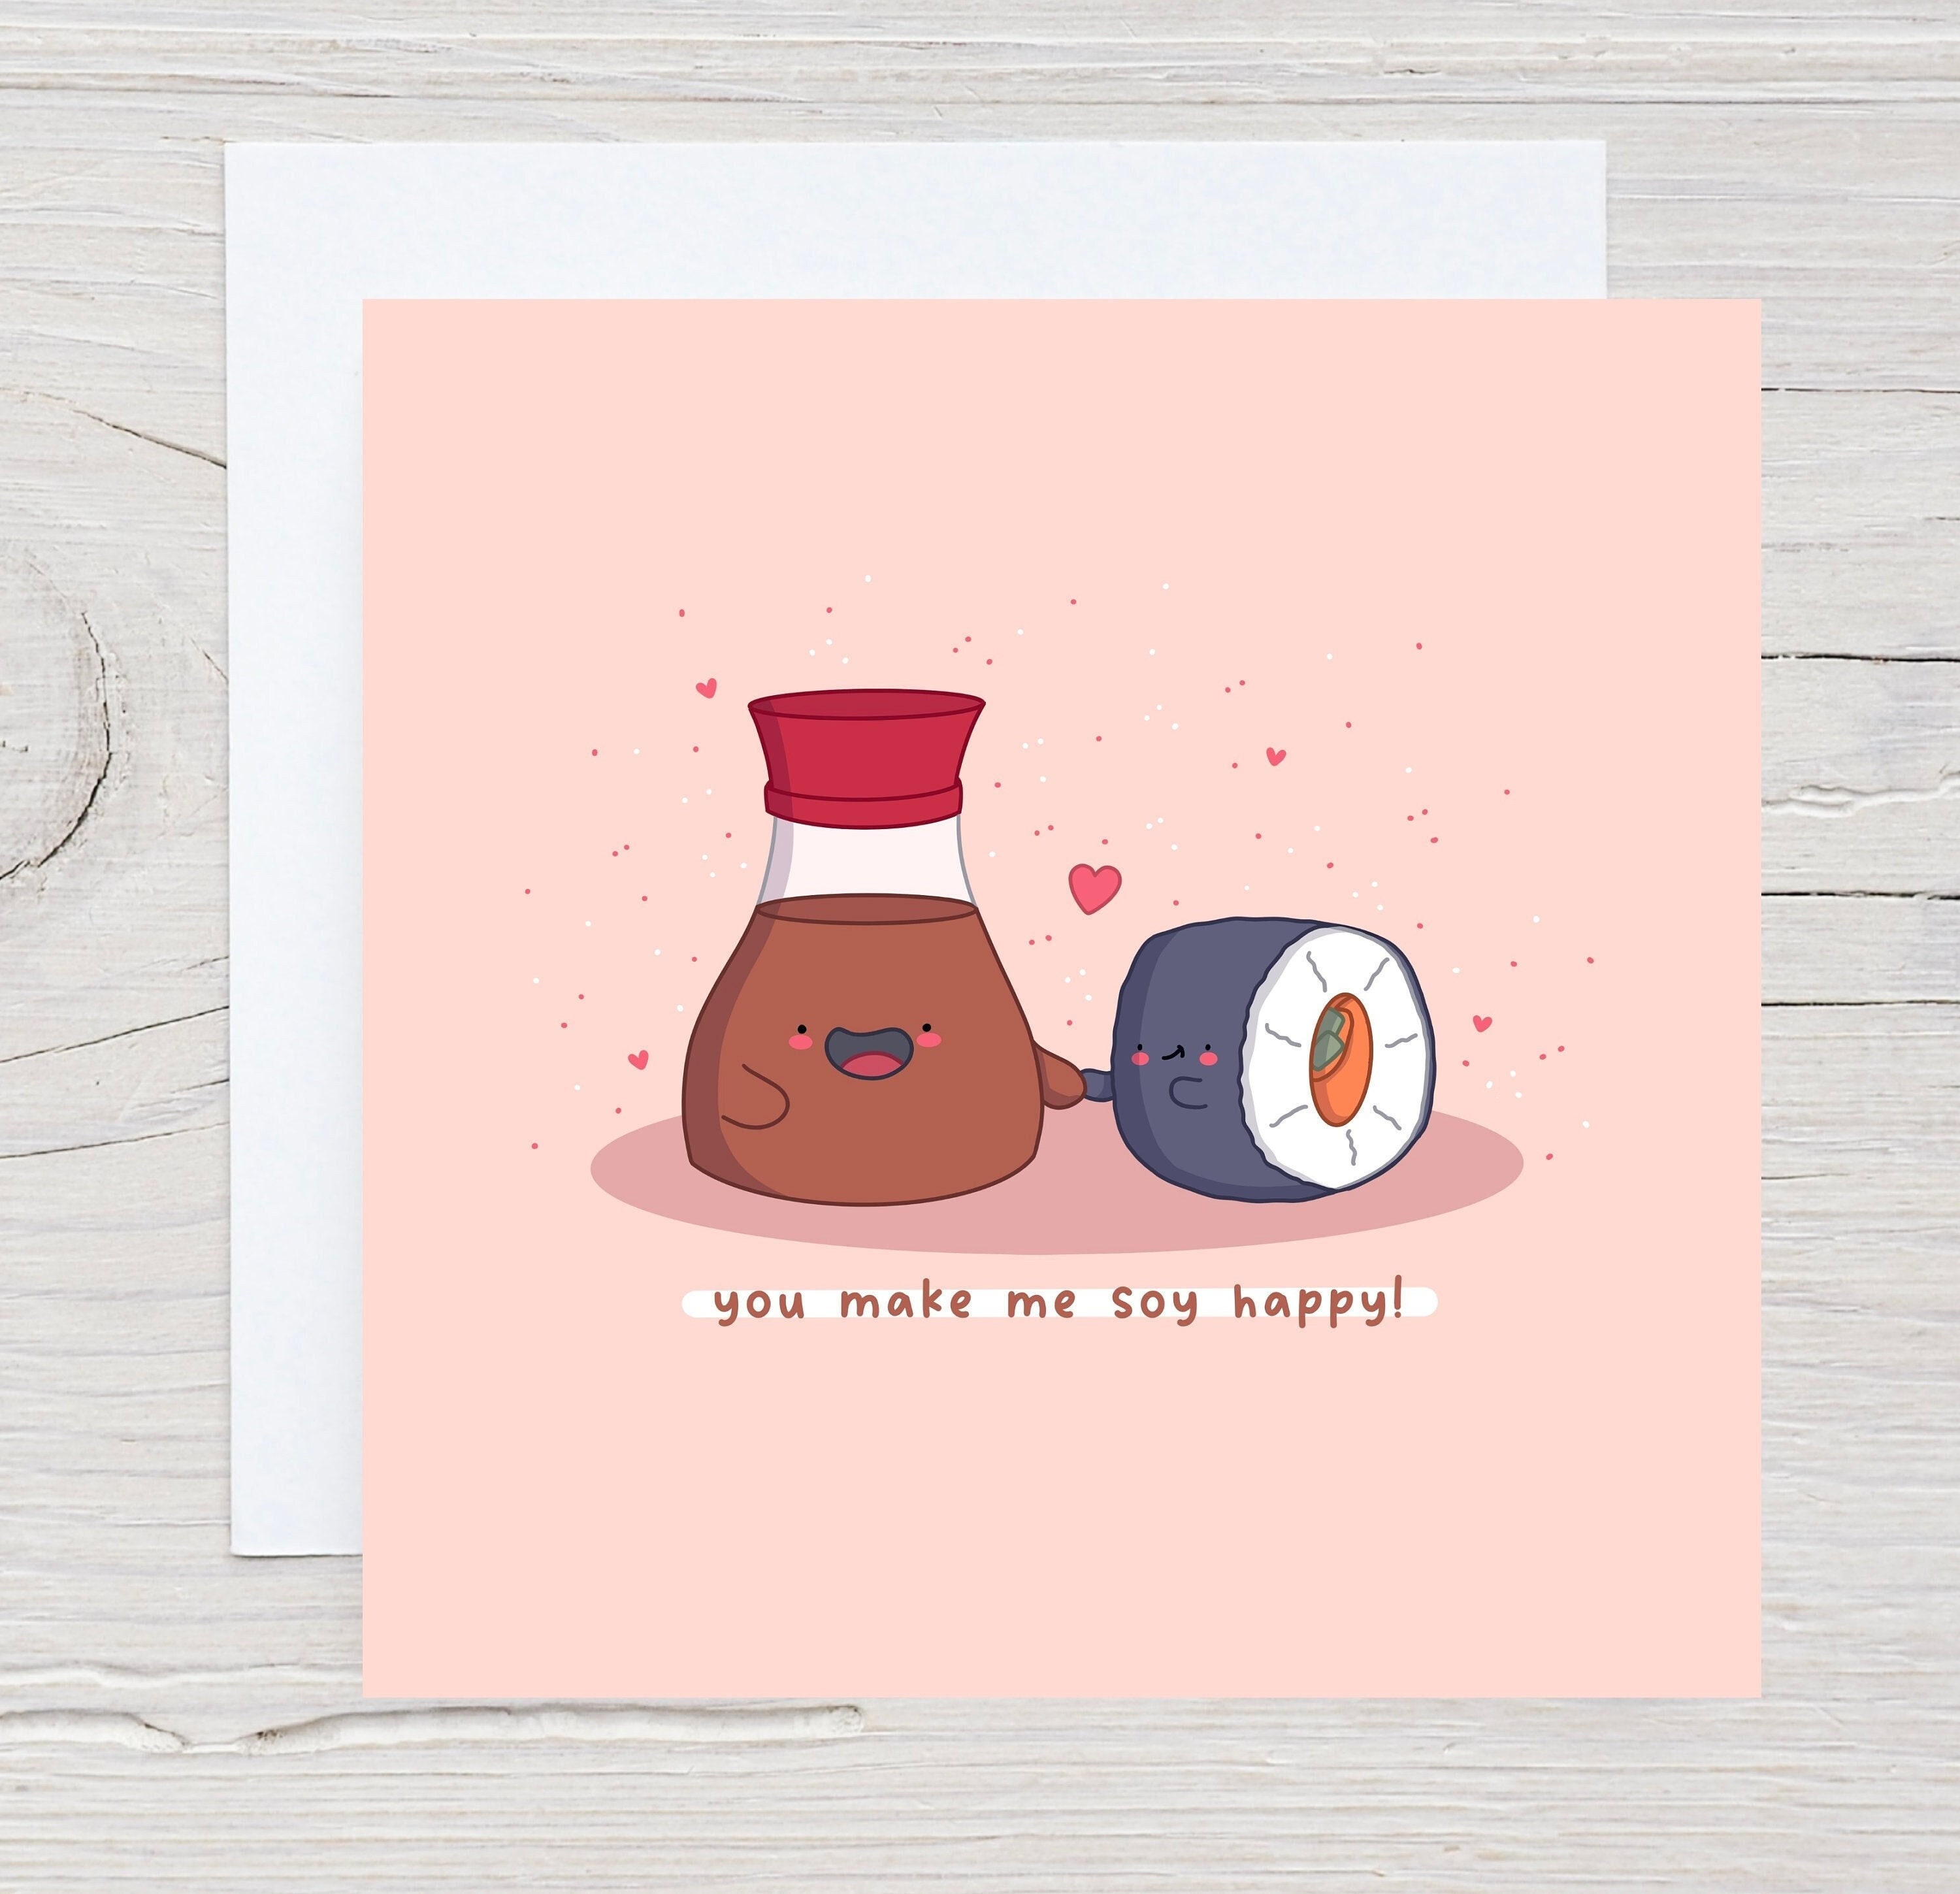 Sushi is my Valentine funny saying with cute sushi illustration